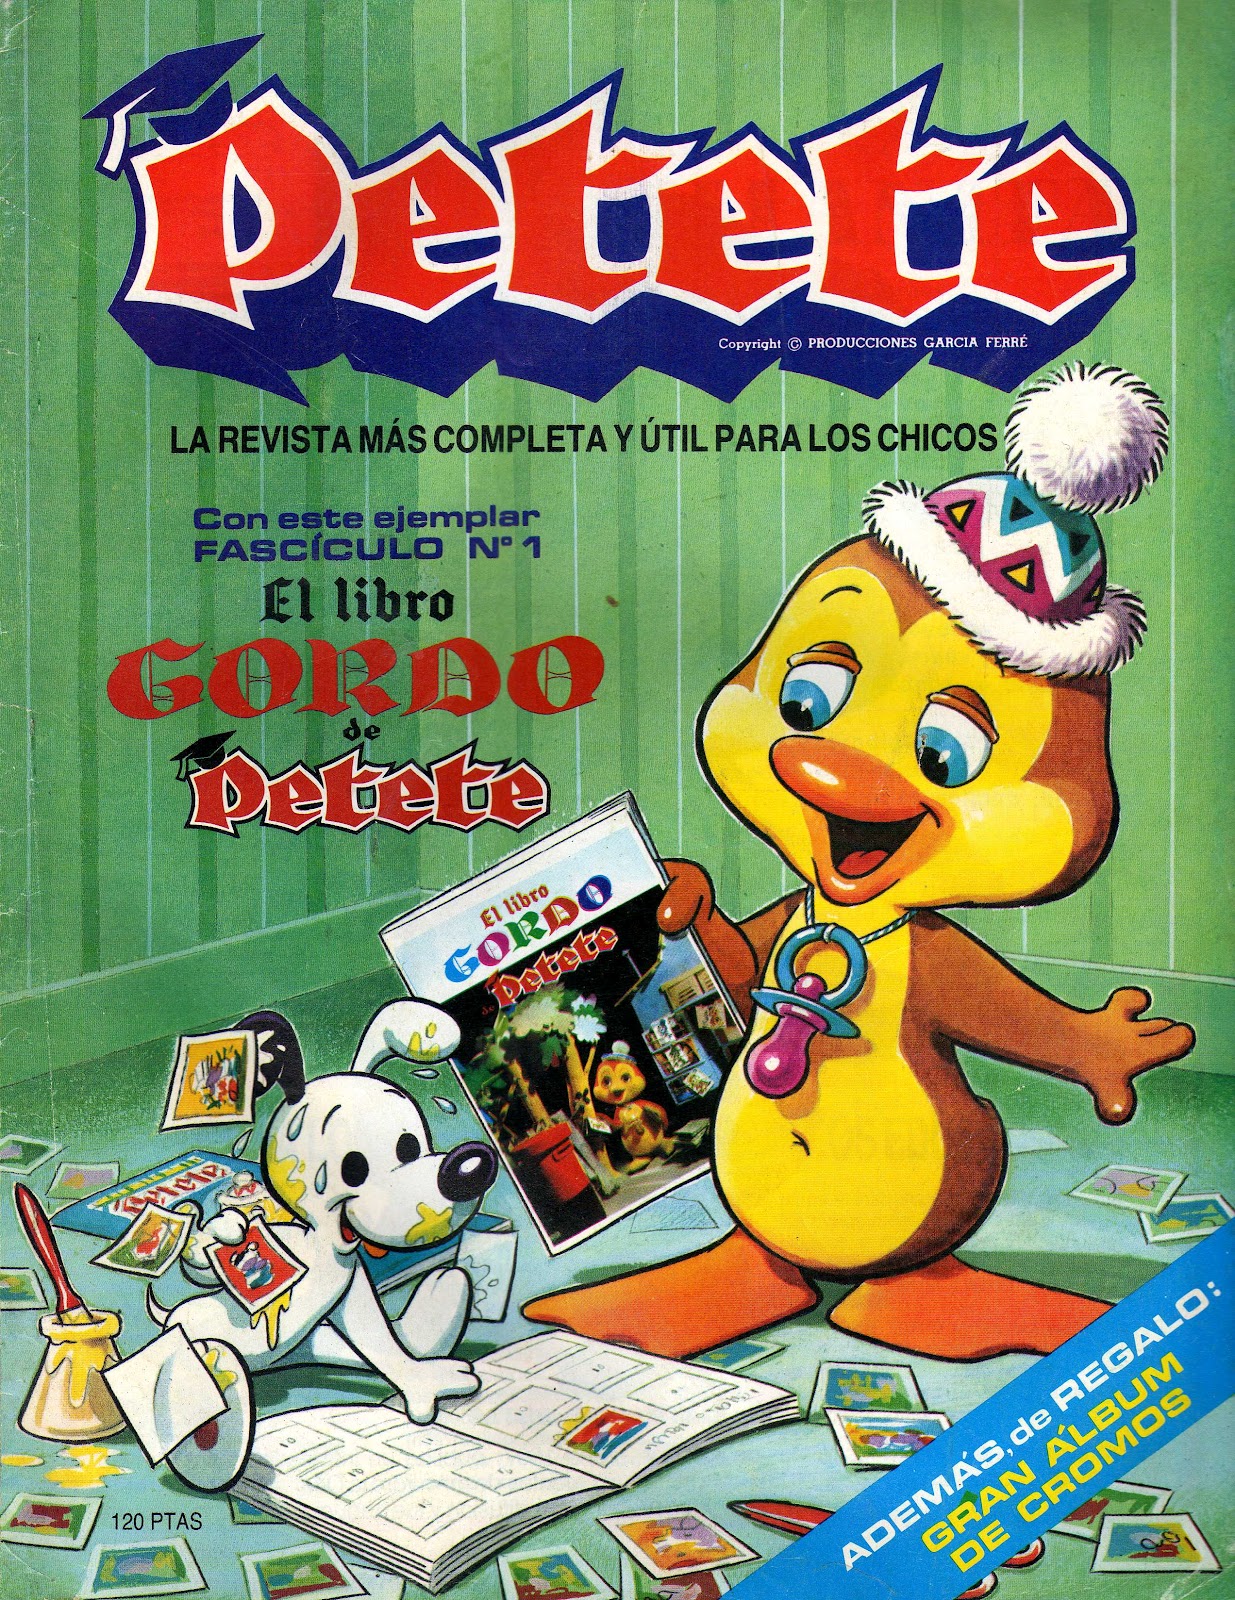 Petete First Issue Cover by Locopoton1 on DeviantArt